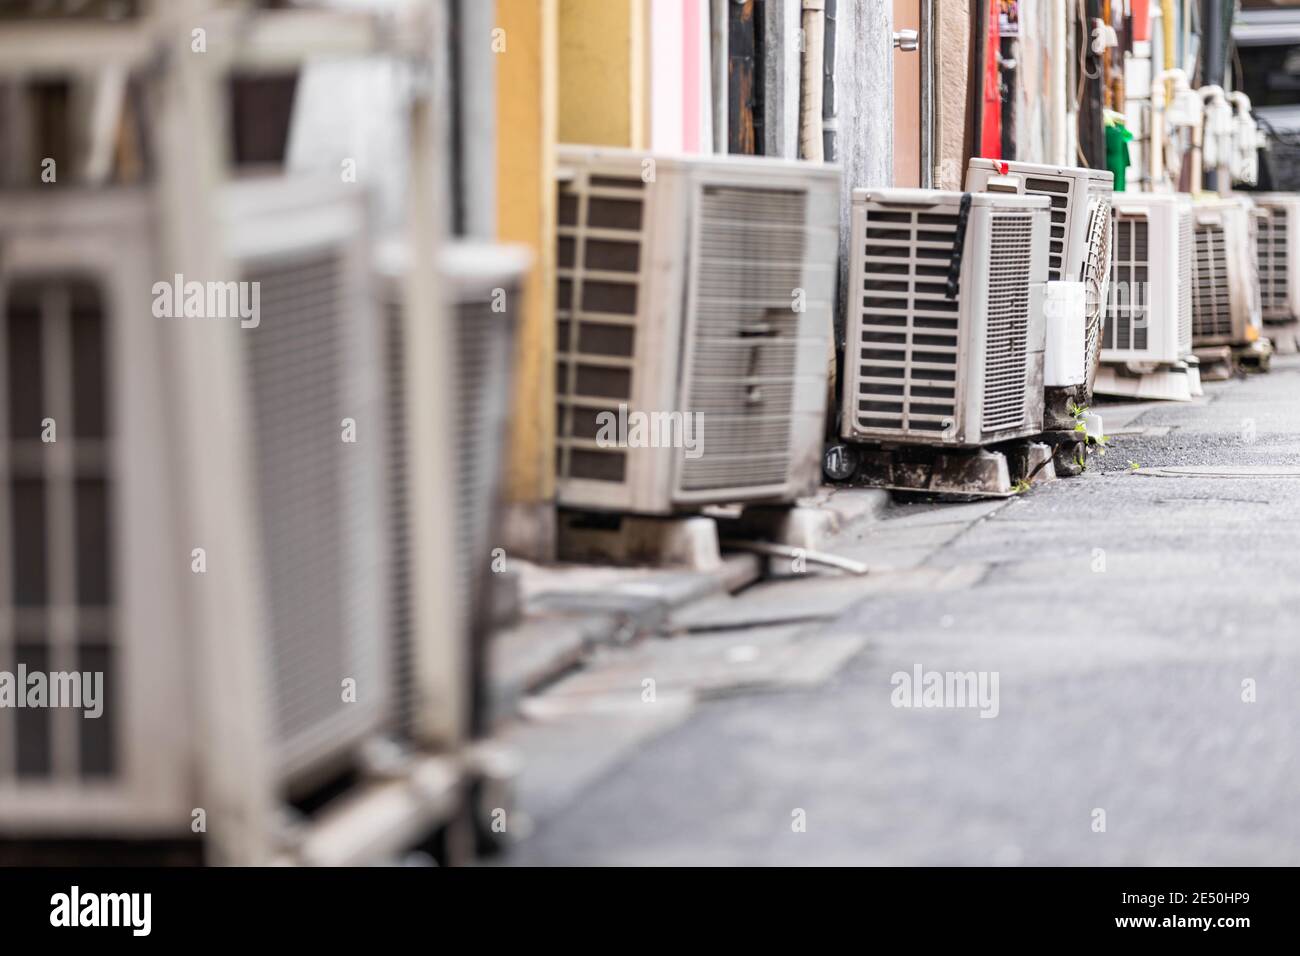 Close up of a row of air conditioning external units, lined in a back alley Stock Photo